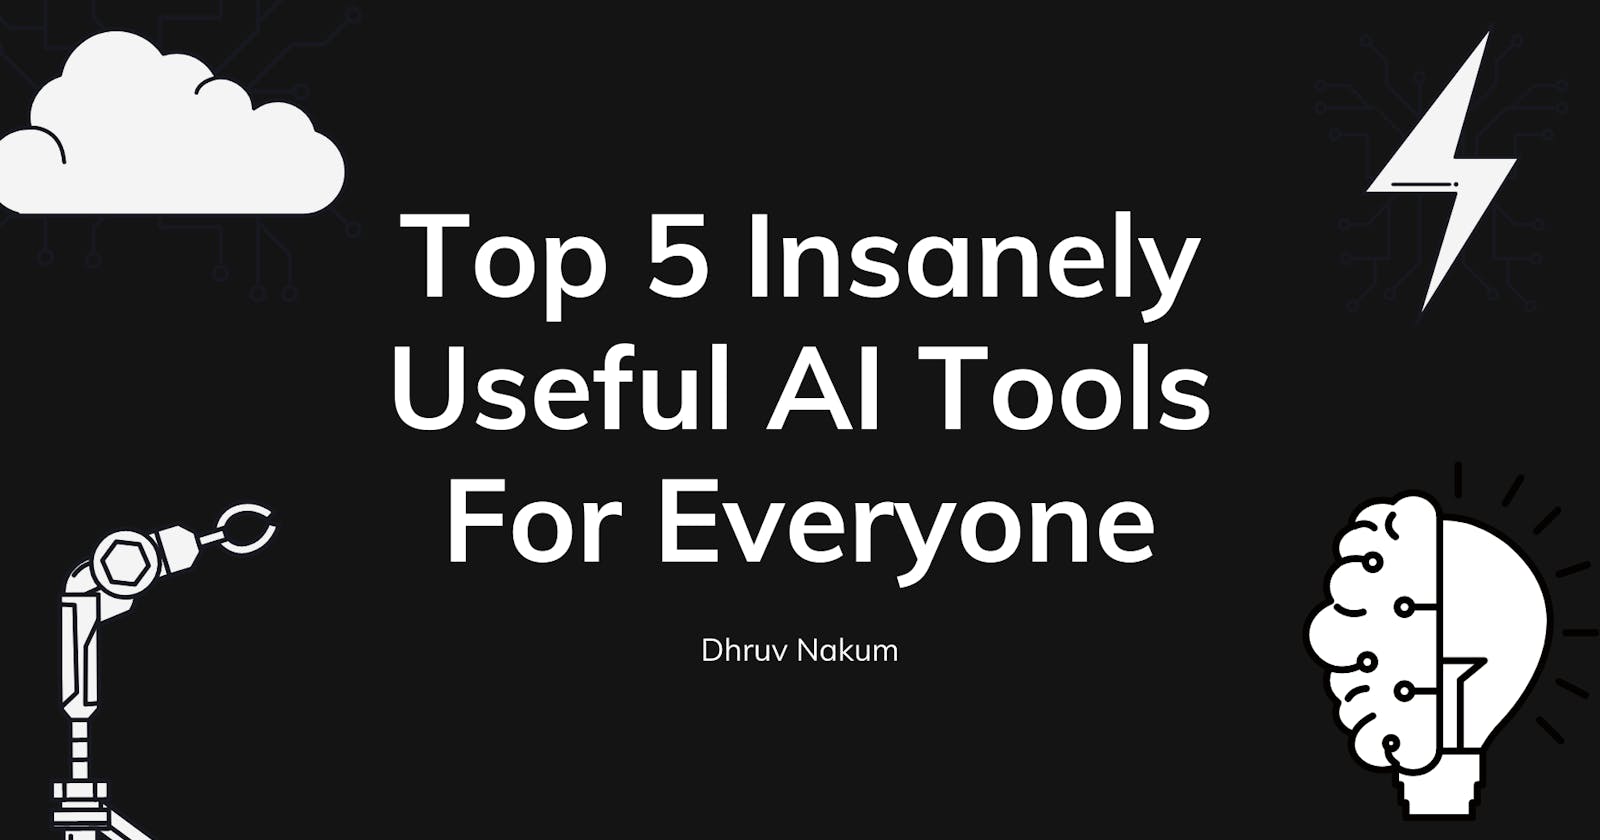 Top 5 Insanely Useful AI Tools For Everyone